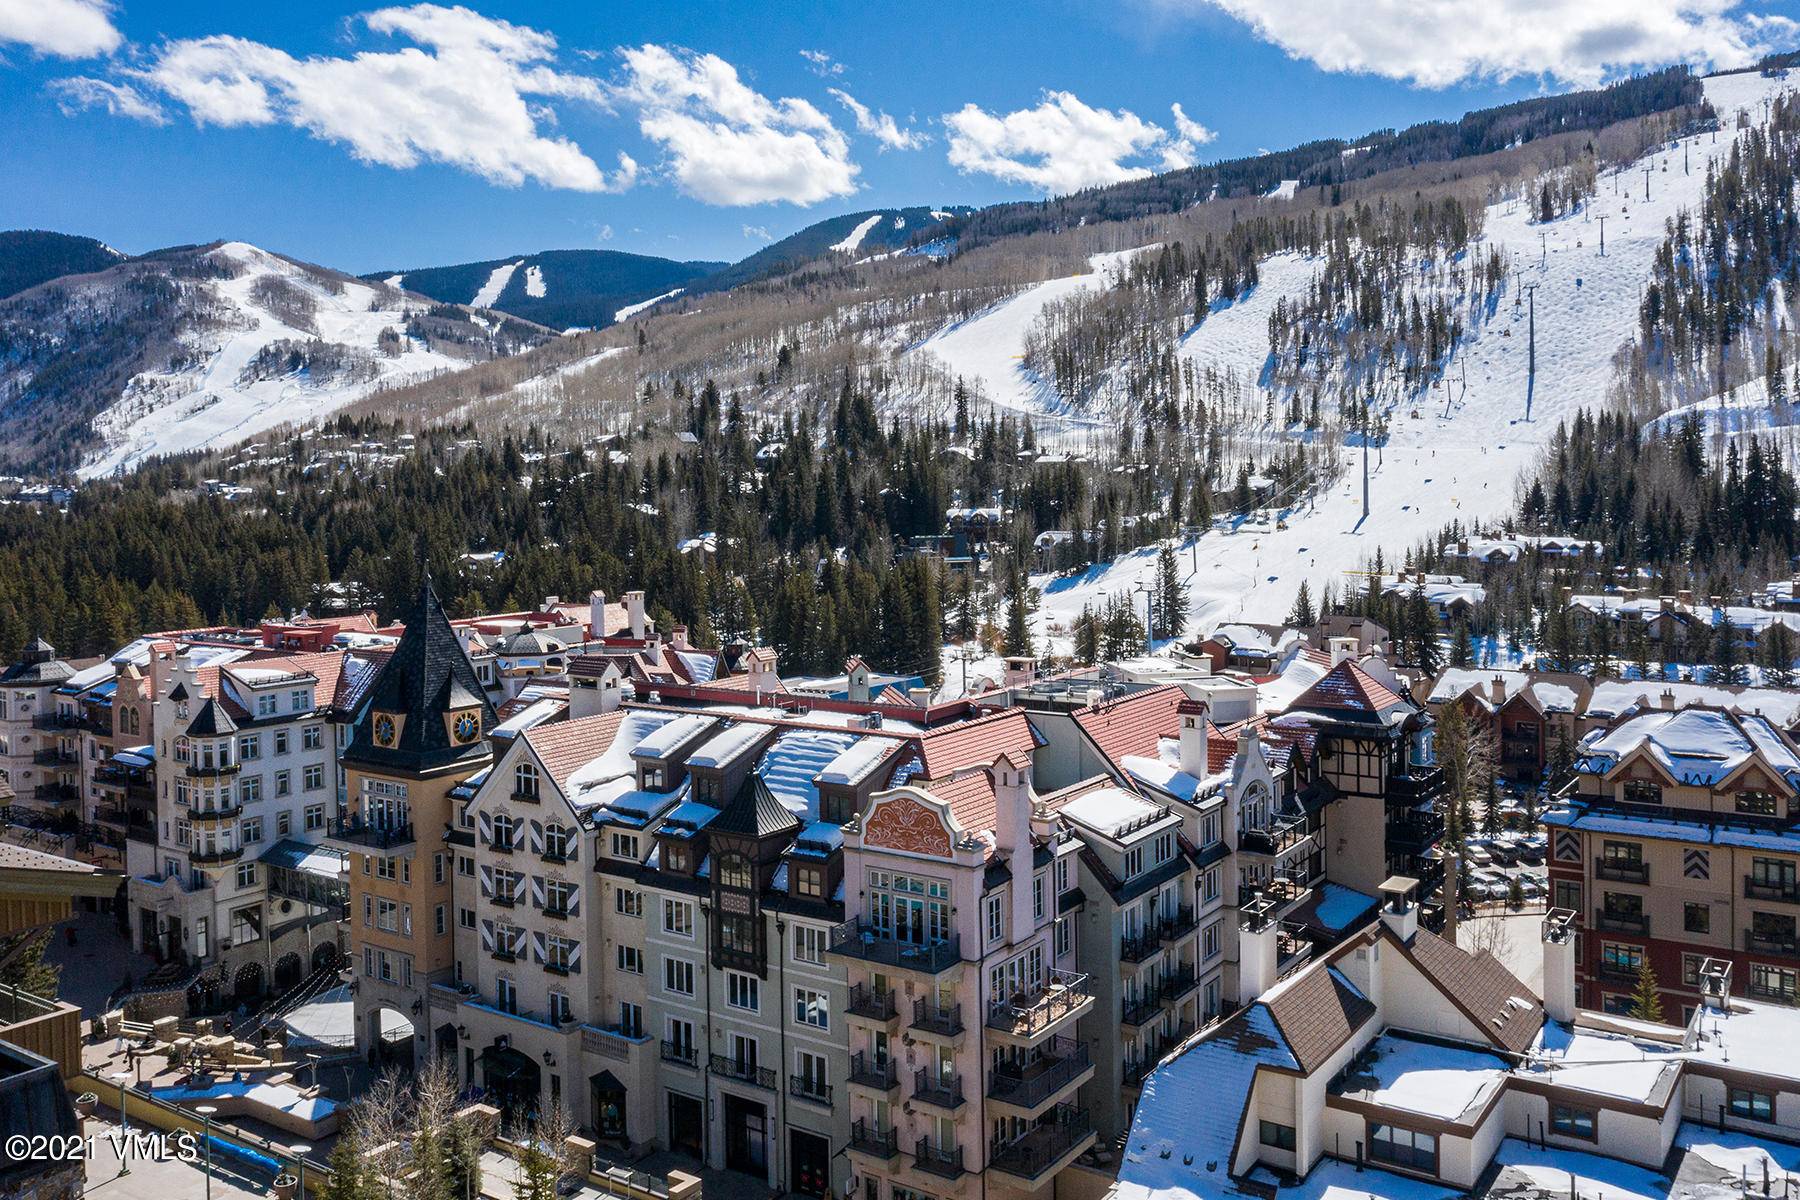 Ski In Ski Out Penthouse at The Arrabelle at Vail SquareEnjoy Vail's luxurious ski in ski out penthouse perfectly located in the Arrabelle at Vail Square, which is known for ...